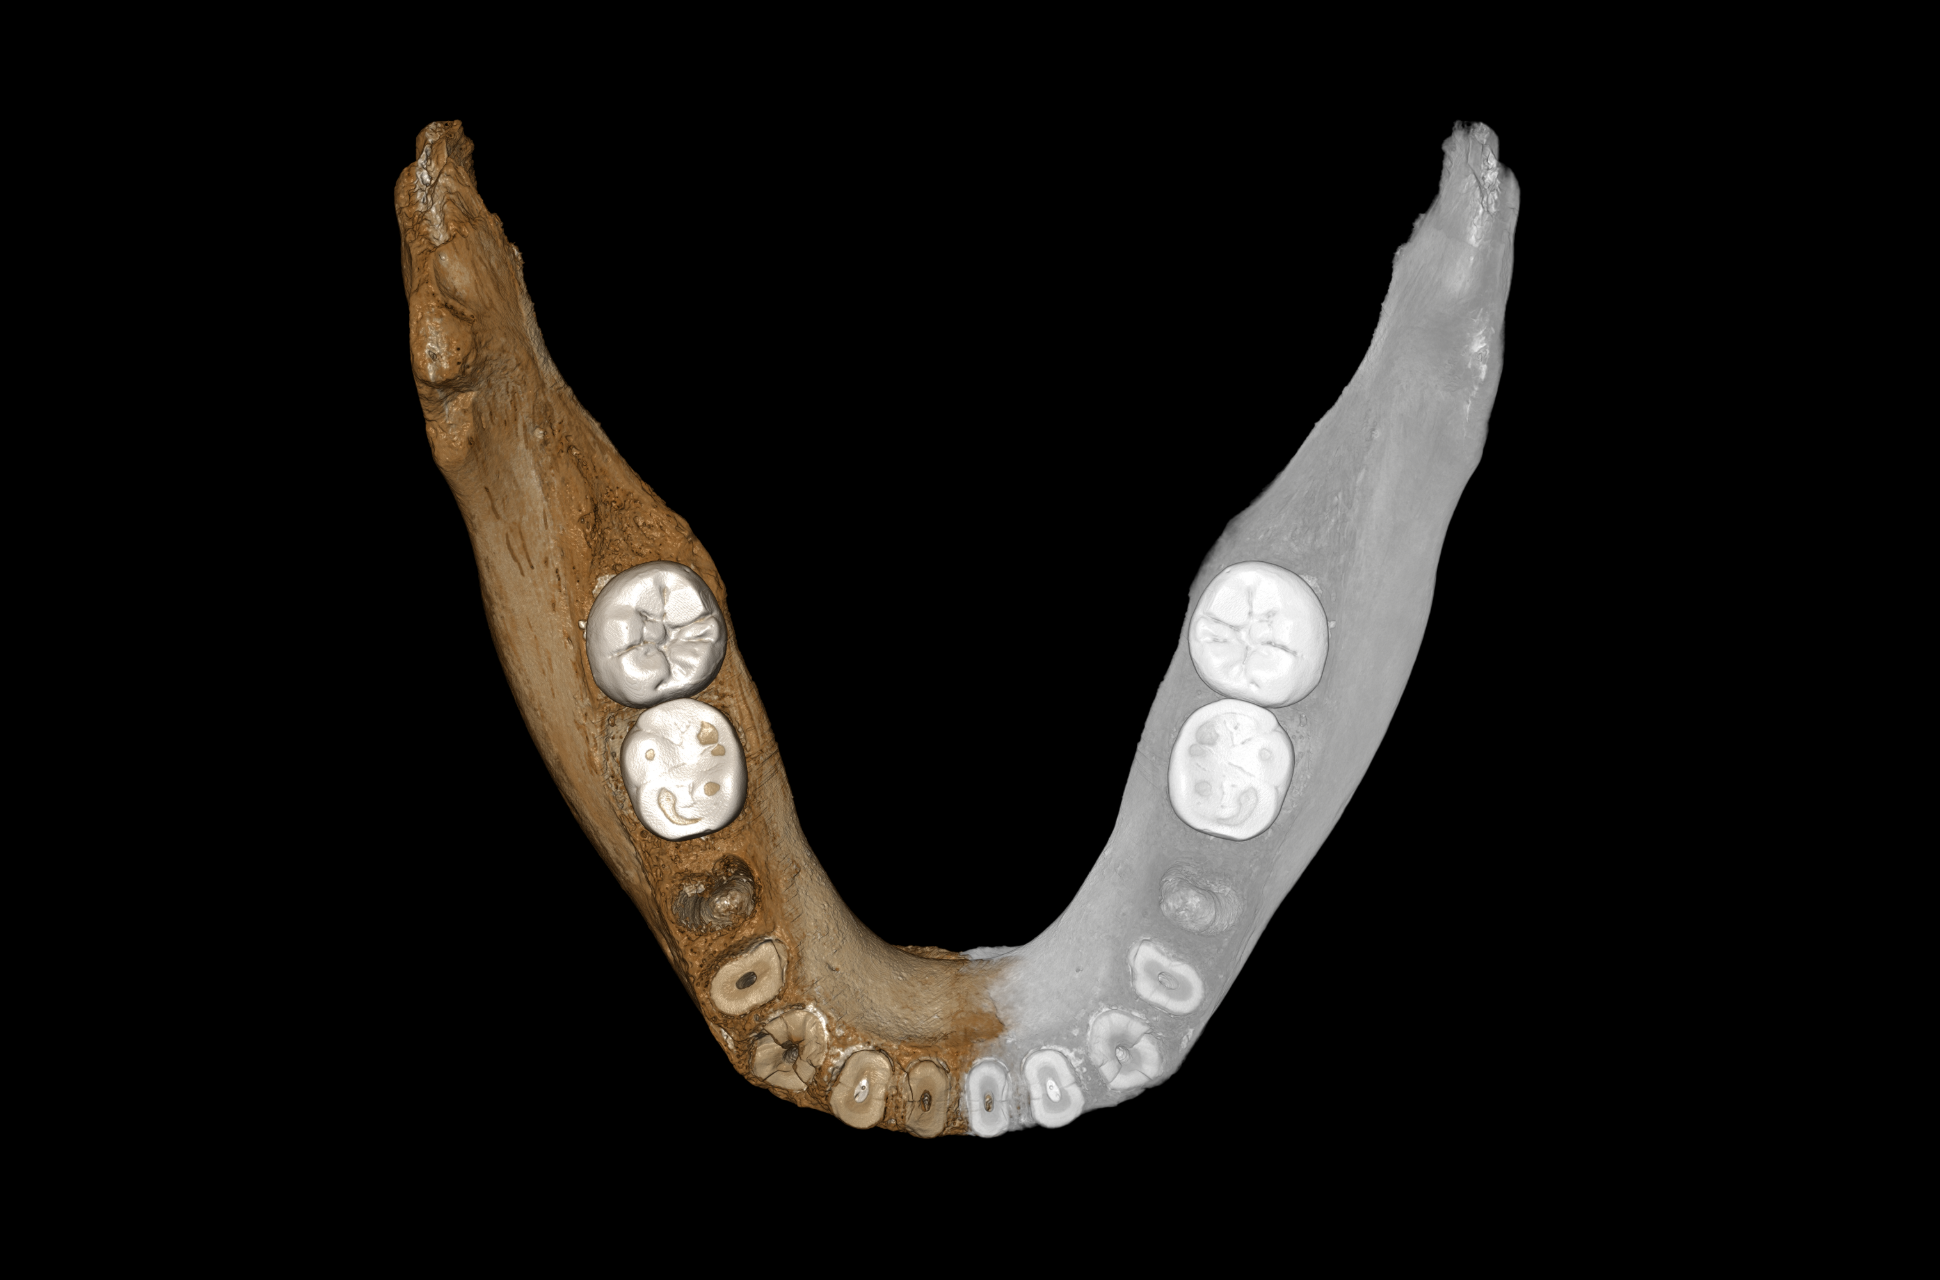 Views of the virtual reconstruction of the Xiahe mandible after digital removal of the adhering carbonate crust. The mandible is so well preserved that it allows for a virtual reconstruction of the two sides of the mandible. Mirrored parts are in grey. (Picture credit: Jean-Jacques Hublin, MPI-EVA, Leipzig)